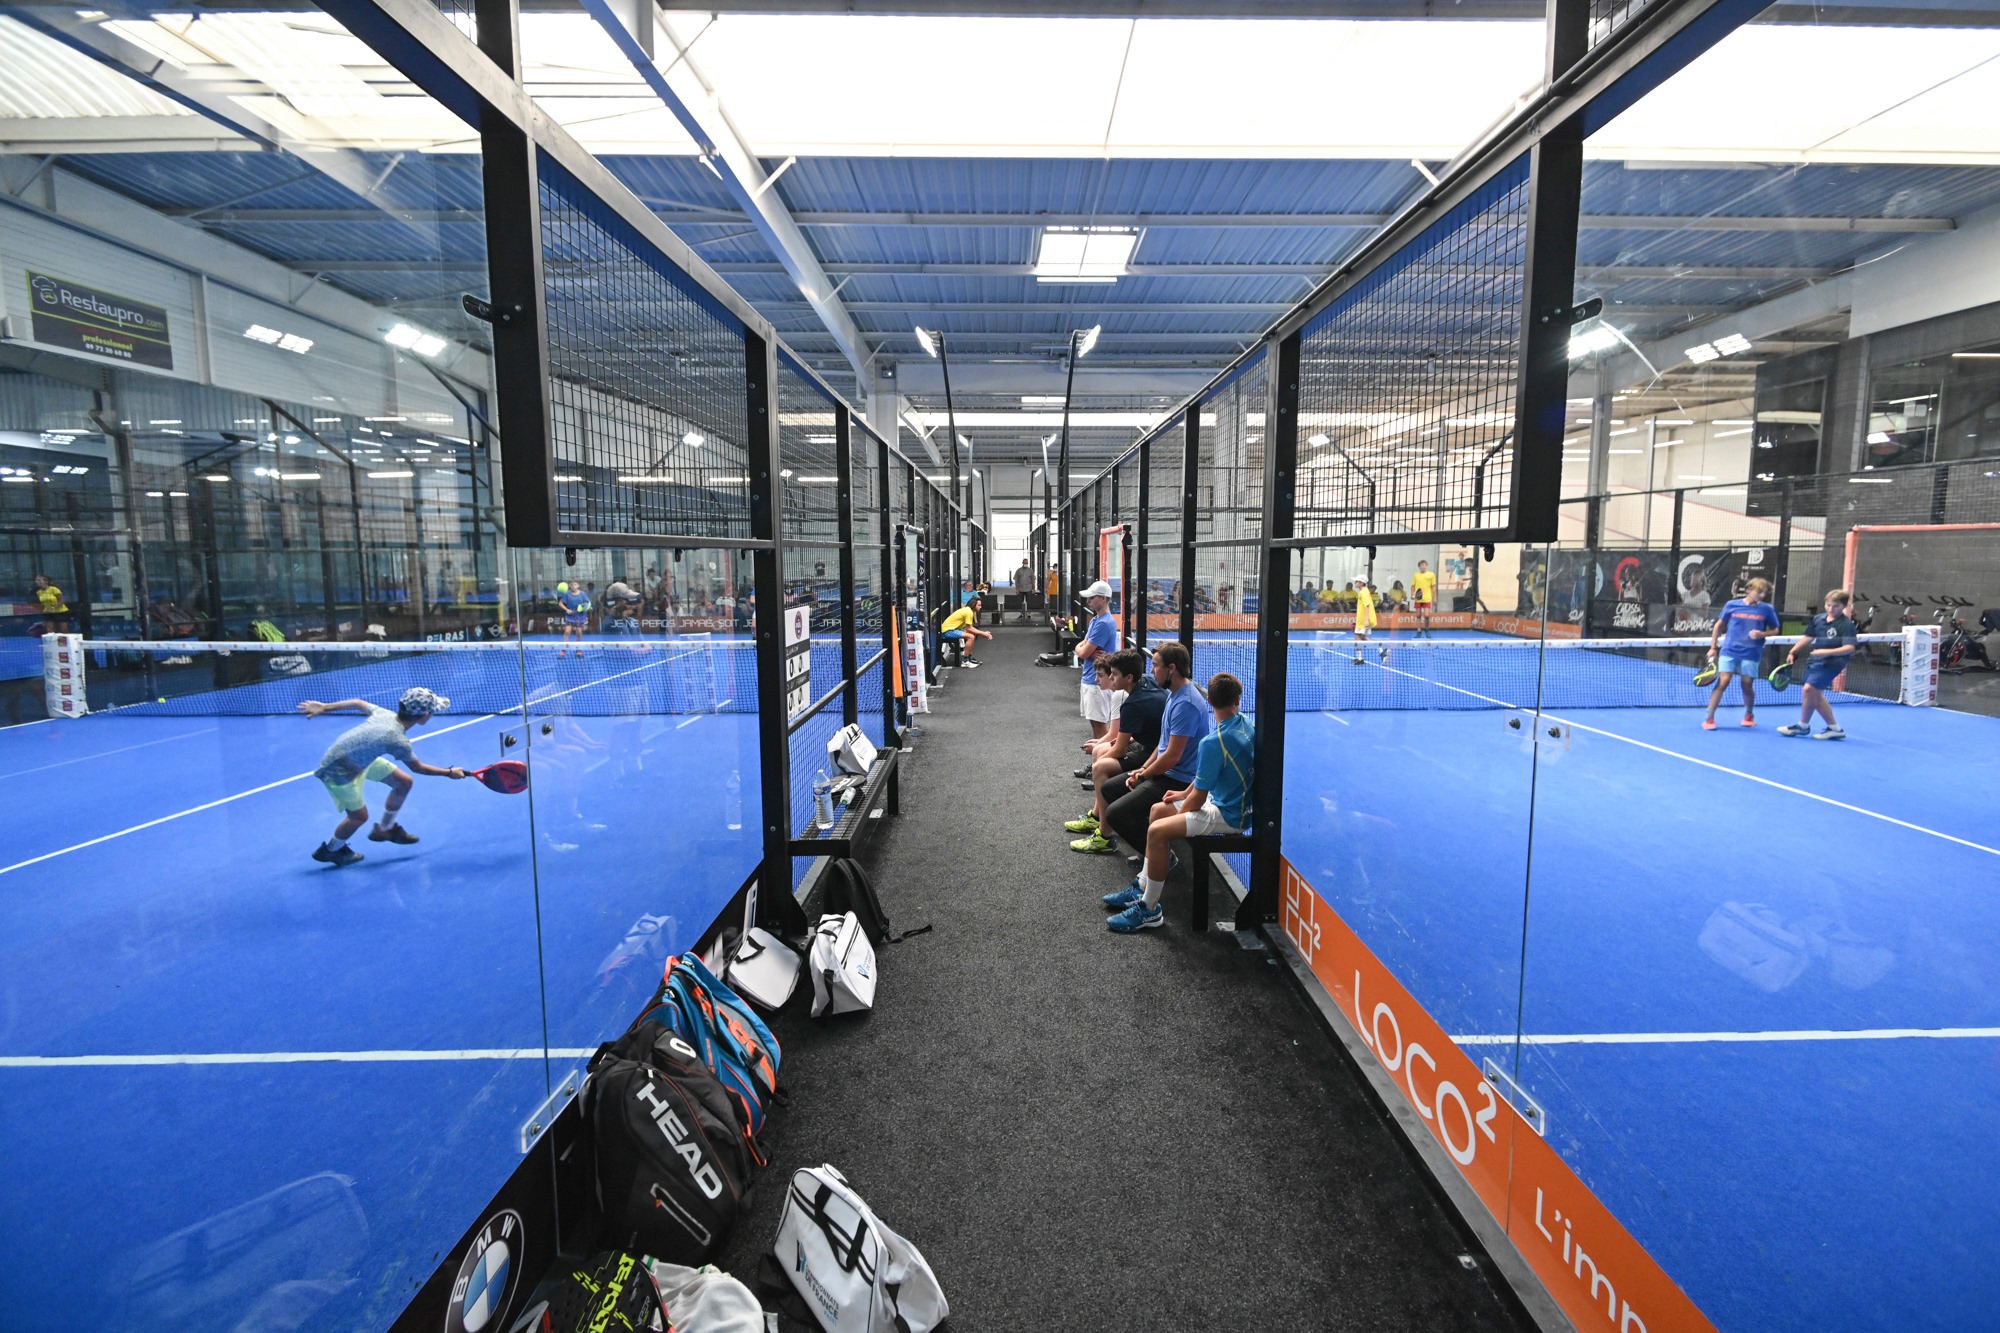 P1000 Toulouse Padel Club: the posters of the semi-finals